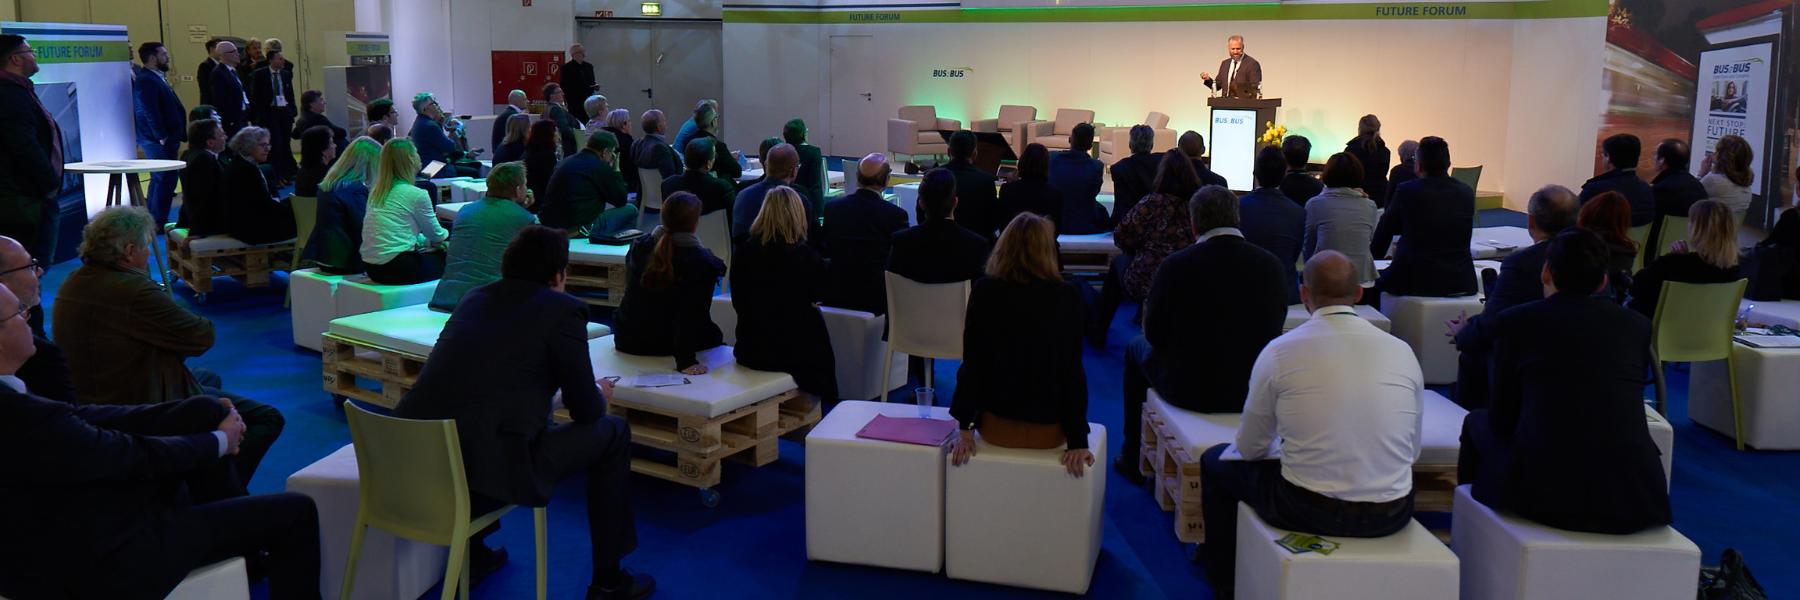 The new Deep Dive Stage creates a relaxed atmosphere for holding important talks and generating new leads. (image: Messe Berlin)